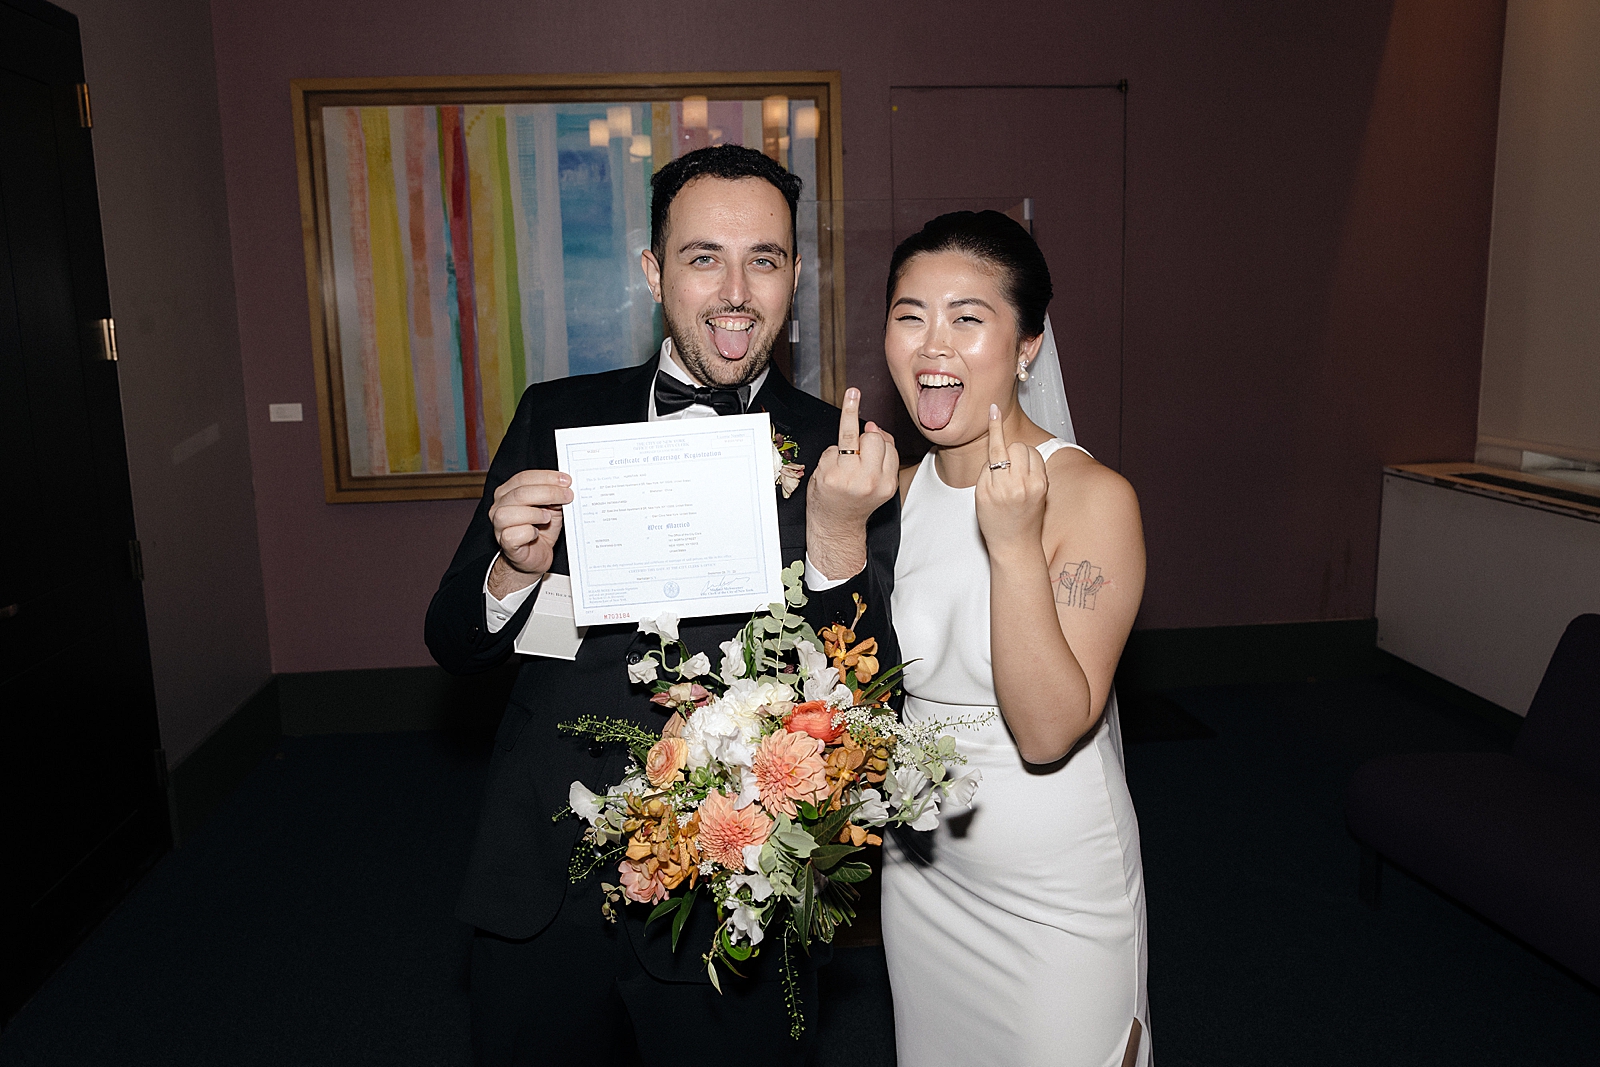 Upper body shot of the bride and groom posing with their ring fingers up as the groom holds their marriage certificate. 